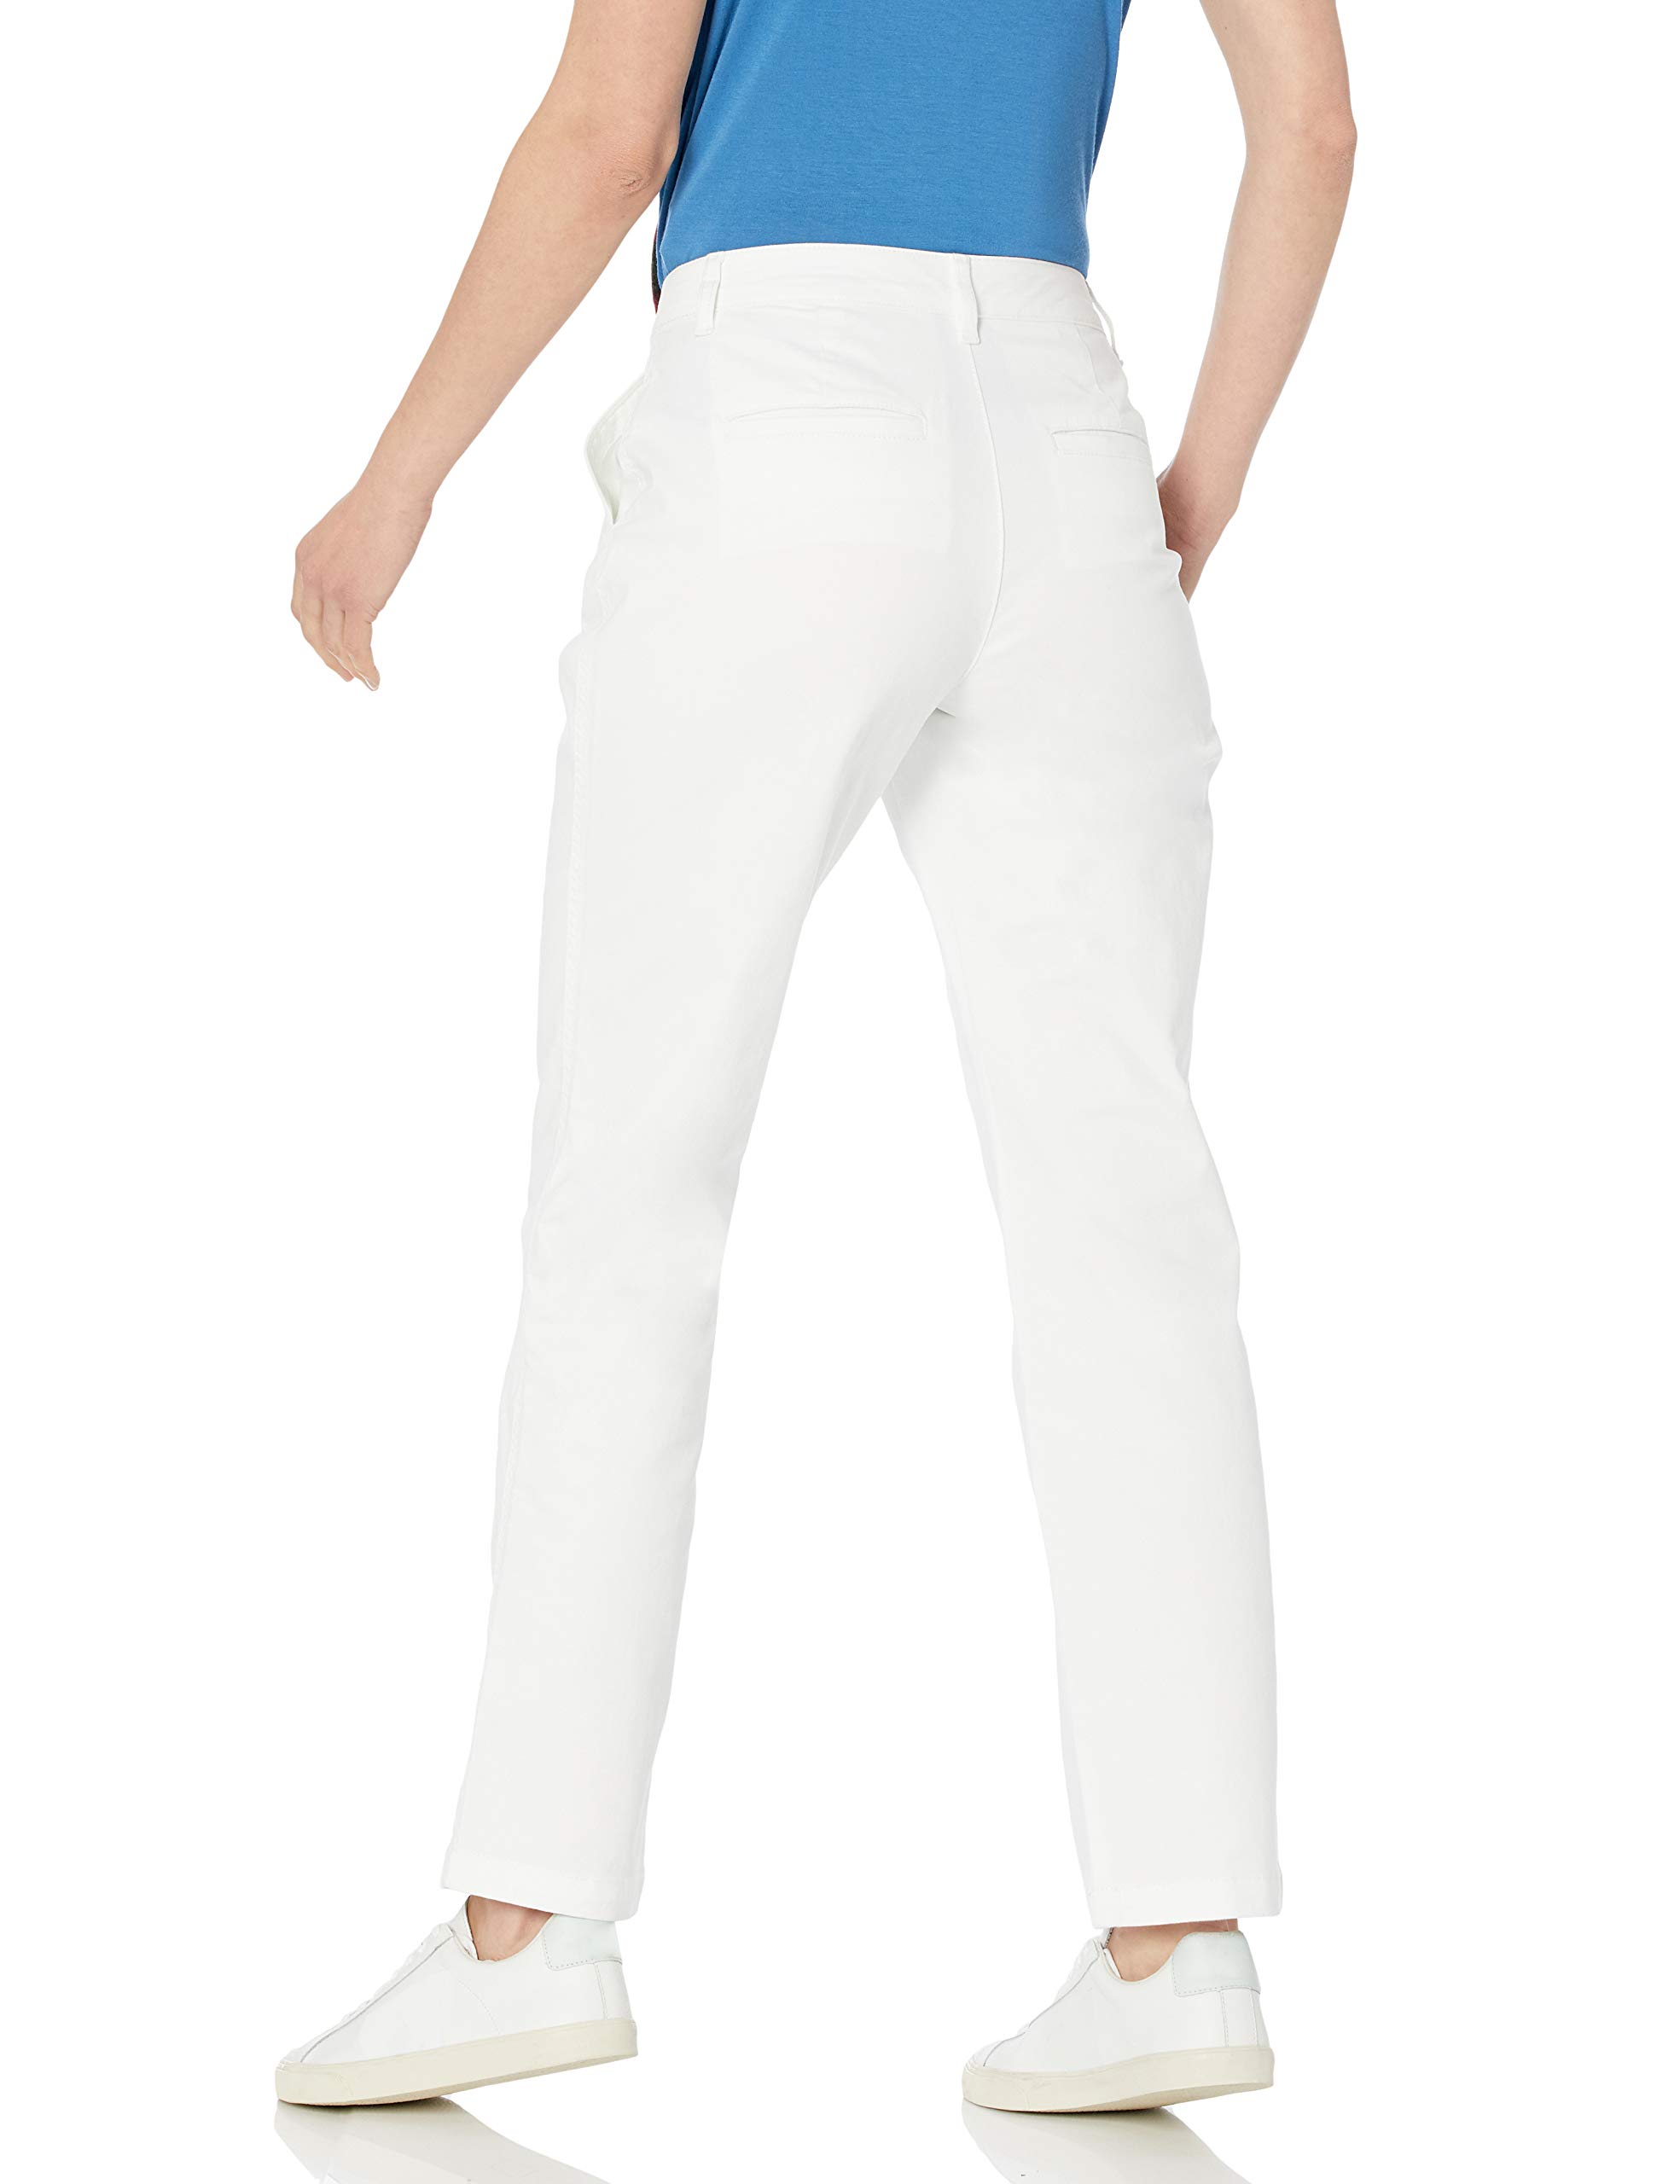 Amazon Essentials Women's Stretch Twill Chino Pant (Available in Straight and Curvy Fits)